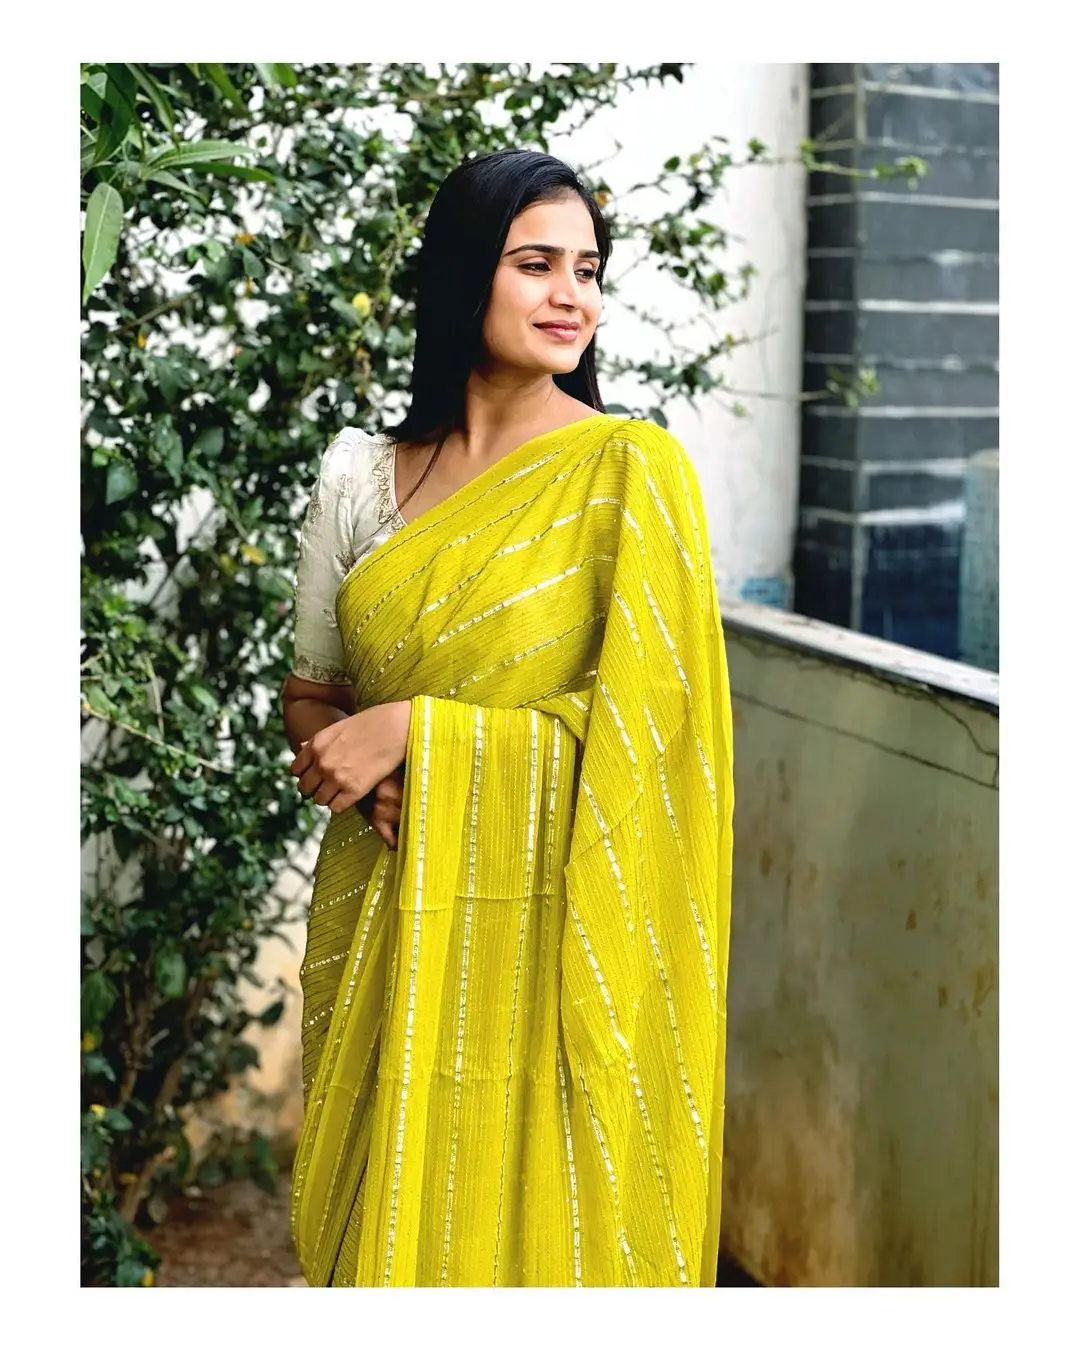 INDIAN GIRL KAVYA SHREE IN TRADITIONAL GREEN SAREE WHITE BLOUSE 3